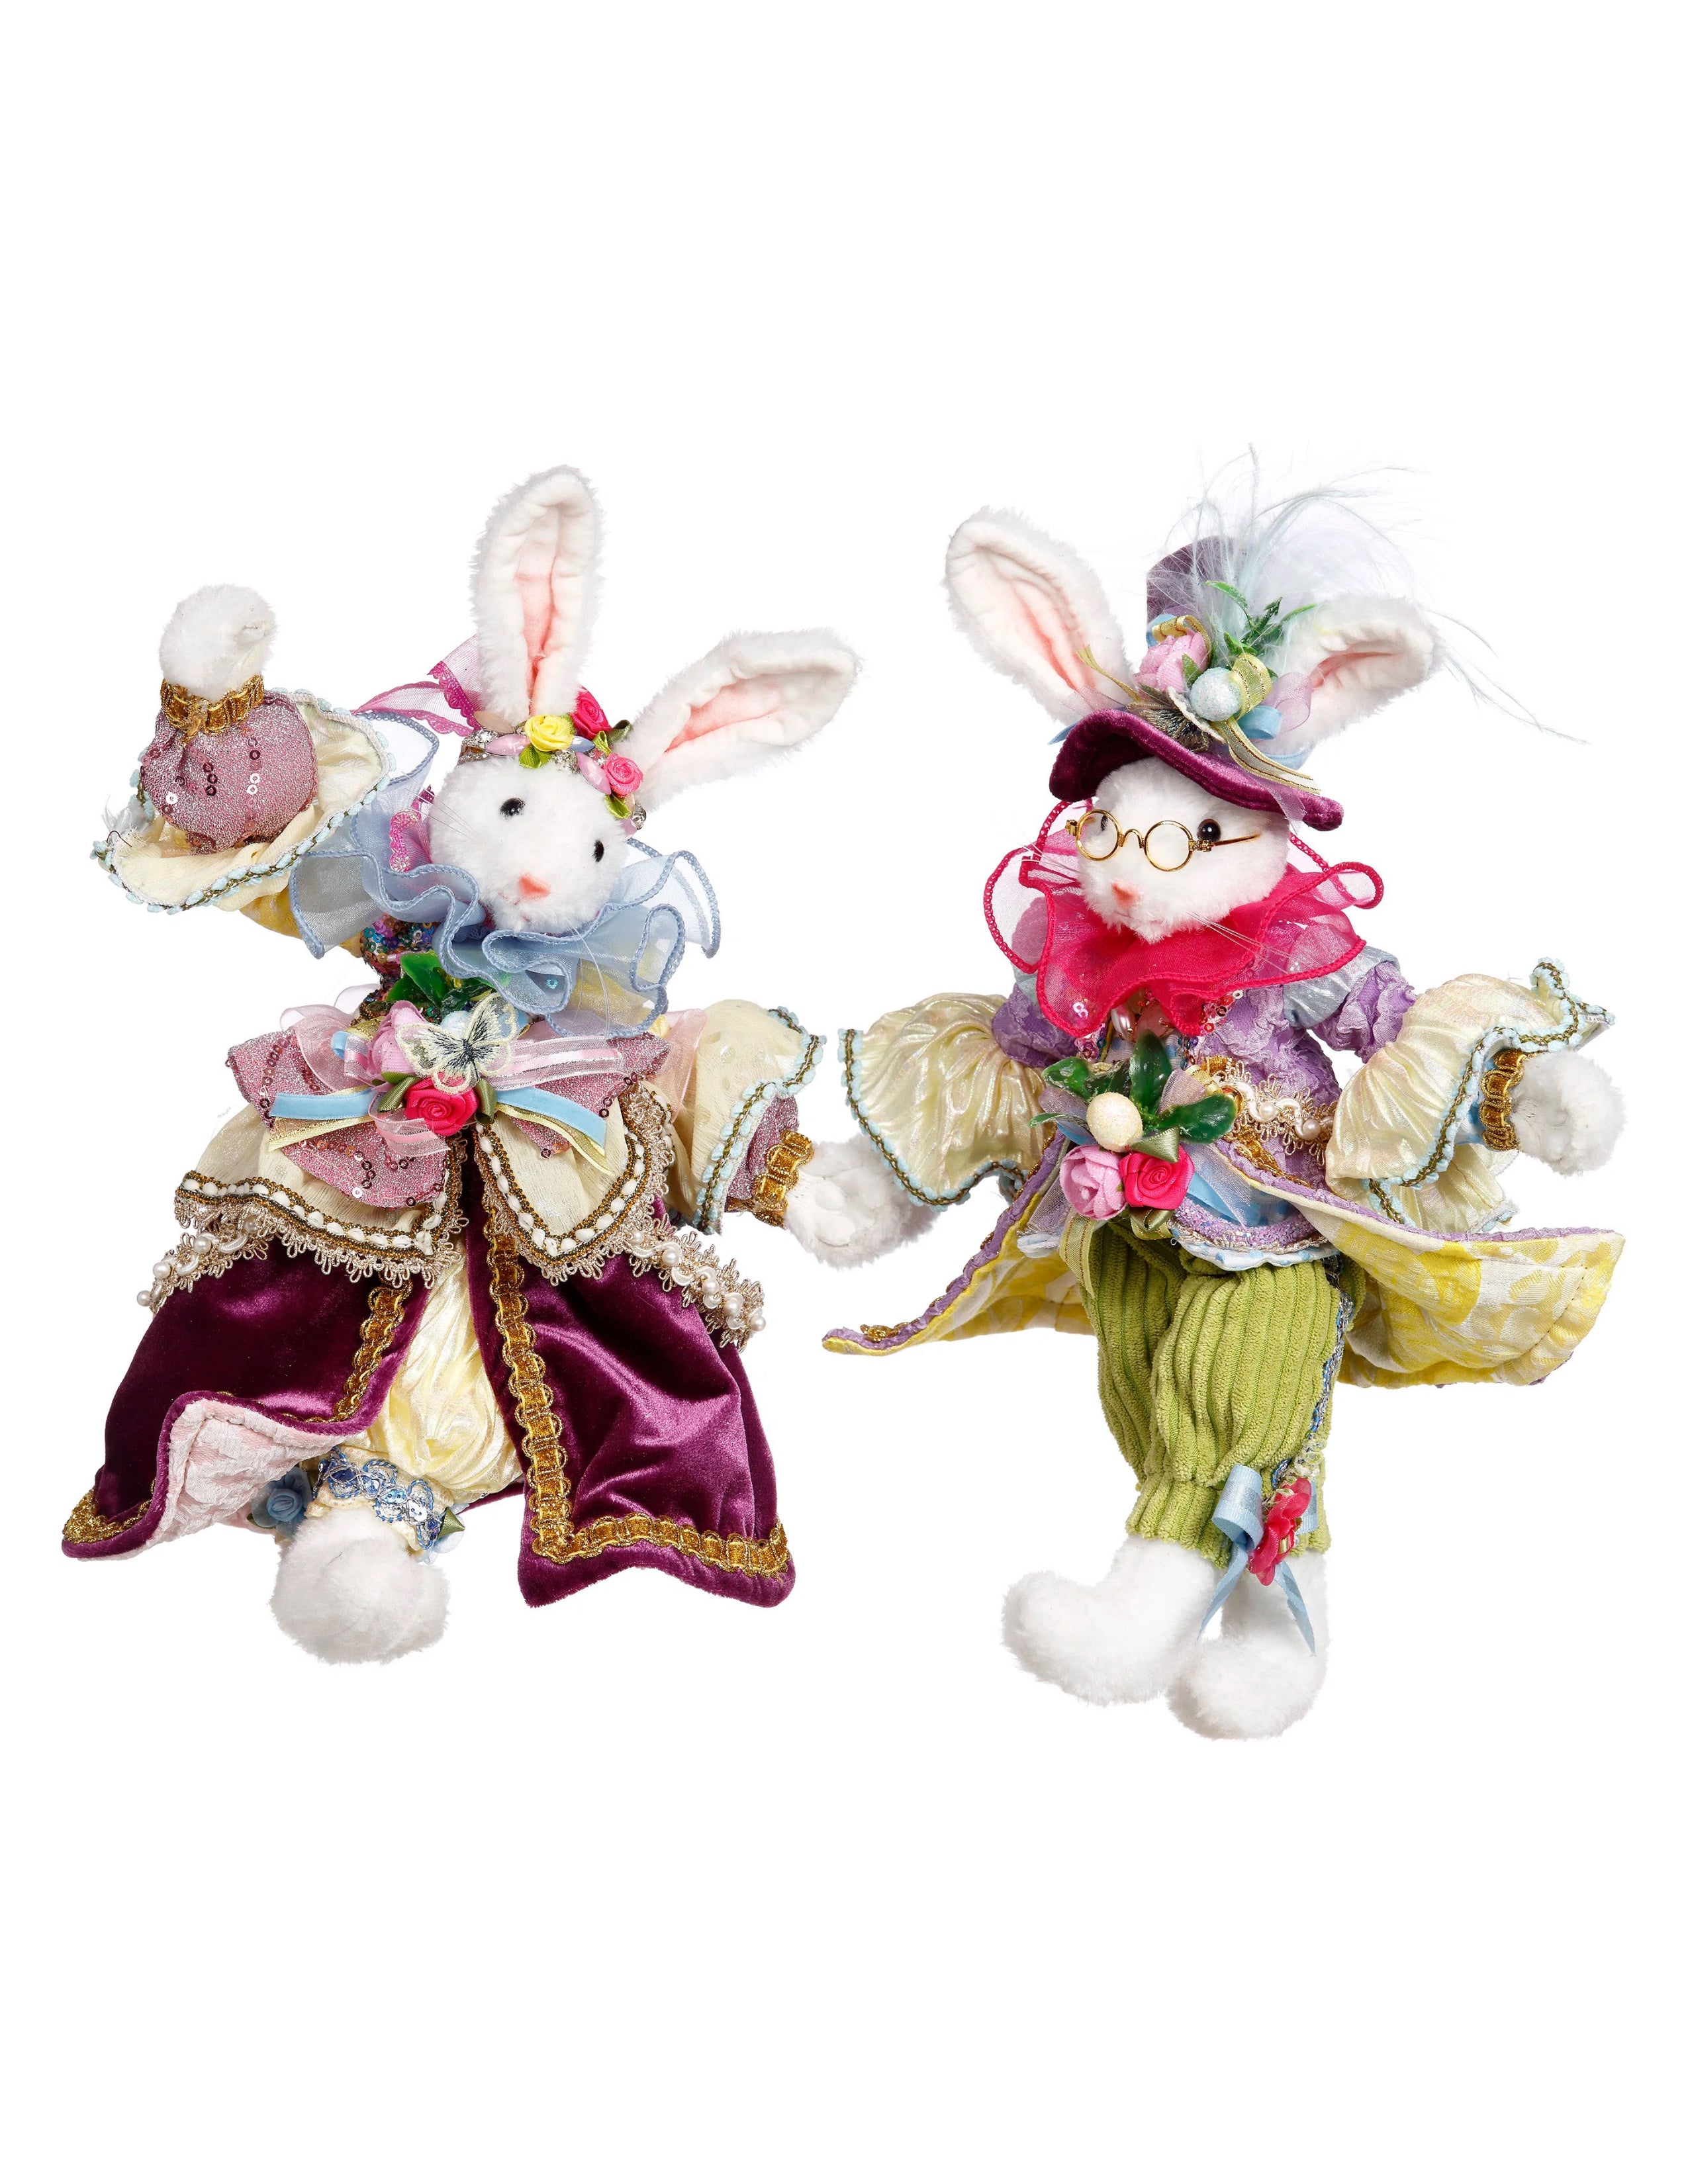 Mr. and Mrs. Cotton Tail